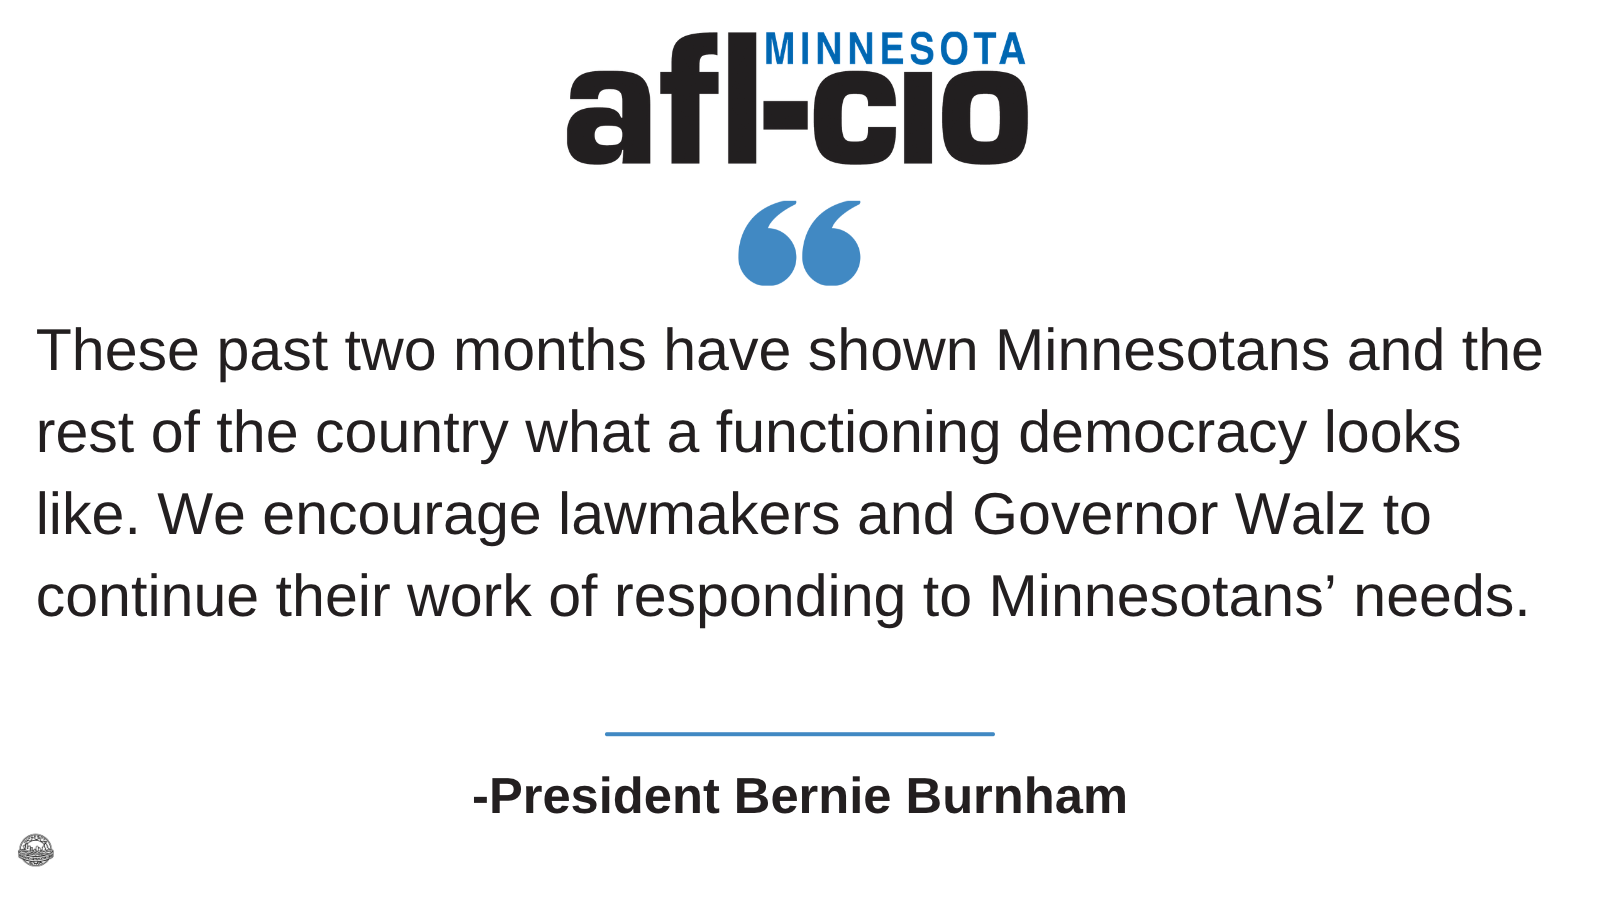 These past two months have shown Minnesotans and the rest of the country what a functioning democracy looks like. We encourage lawmakers and Governor Walz to continue their work of responding to Minnesotans' needs. -President Bernie Burnham